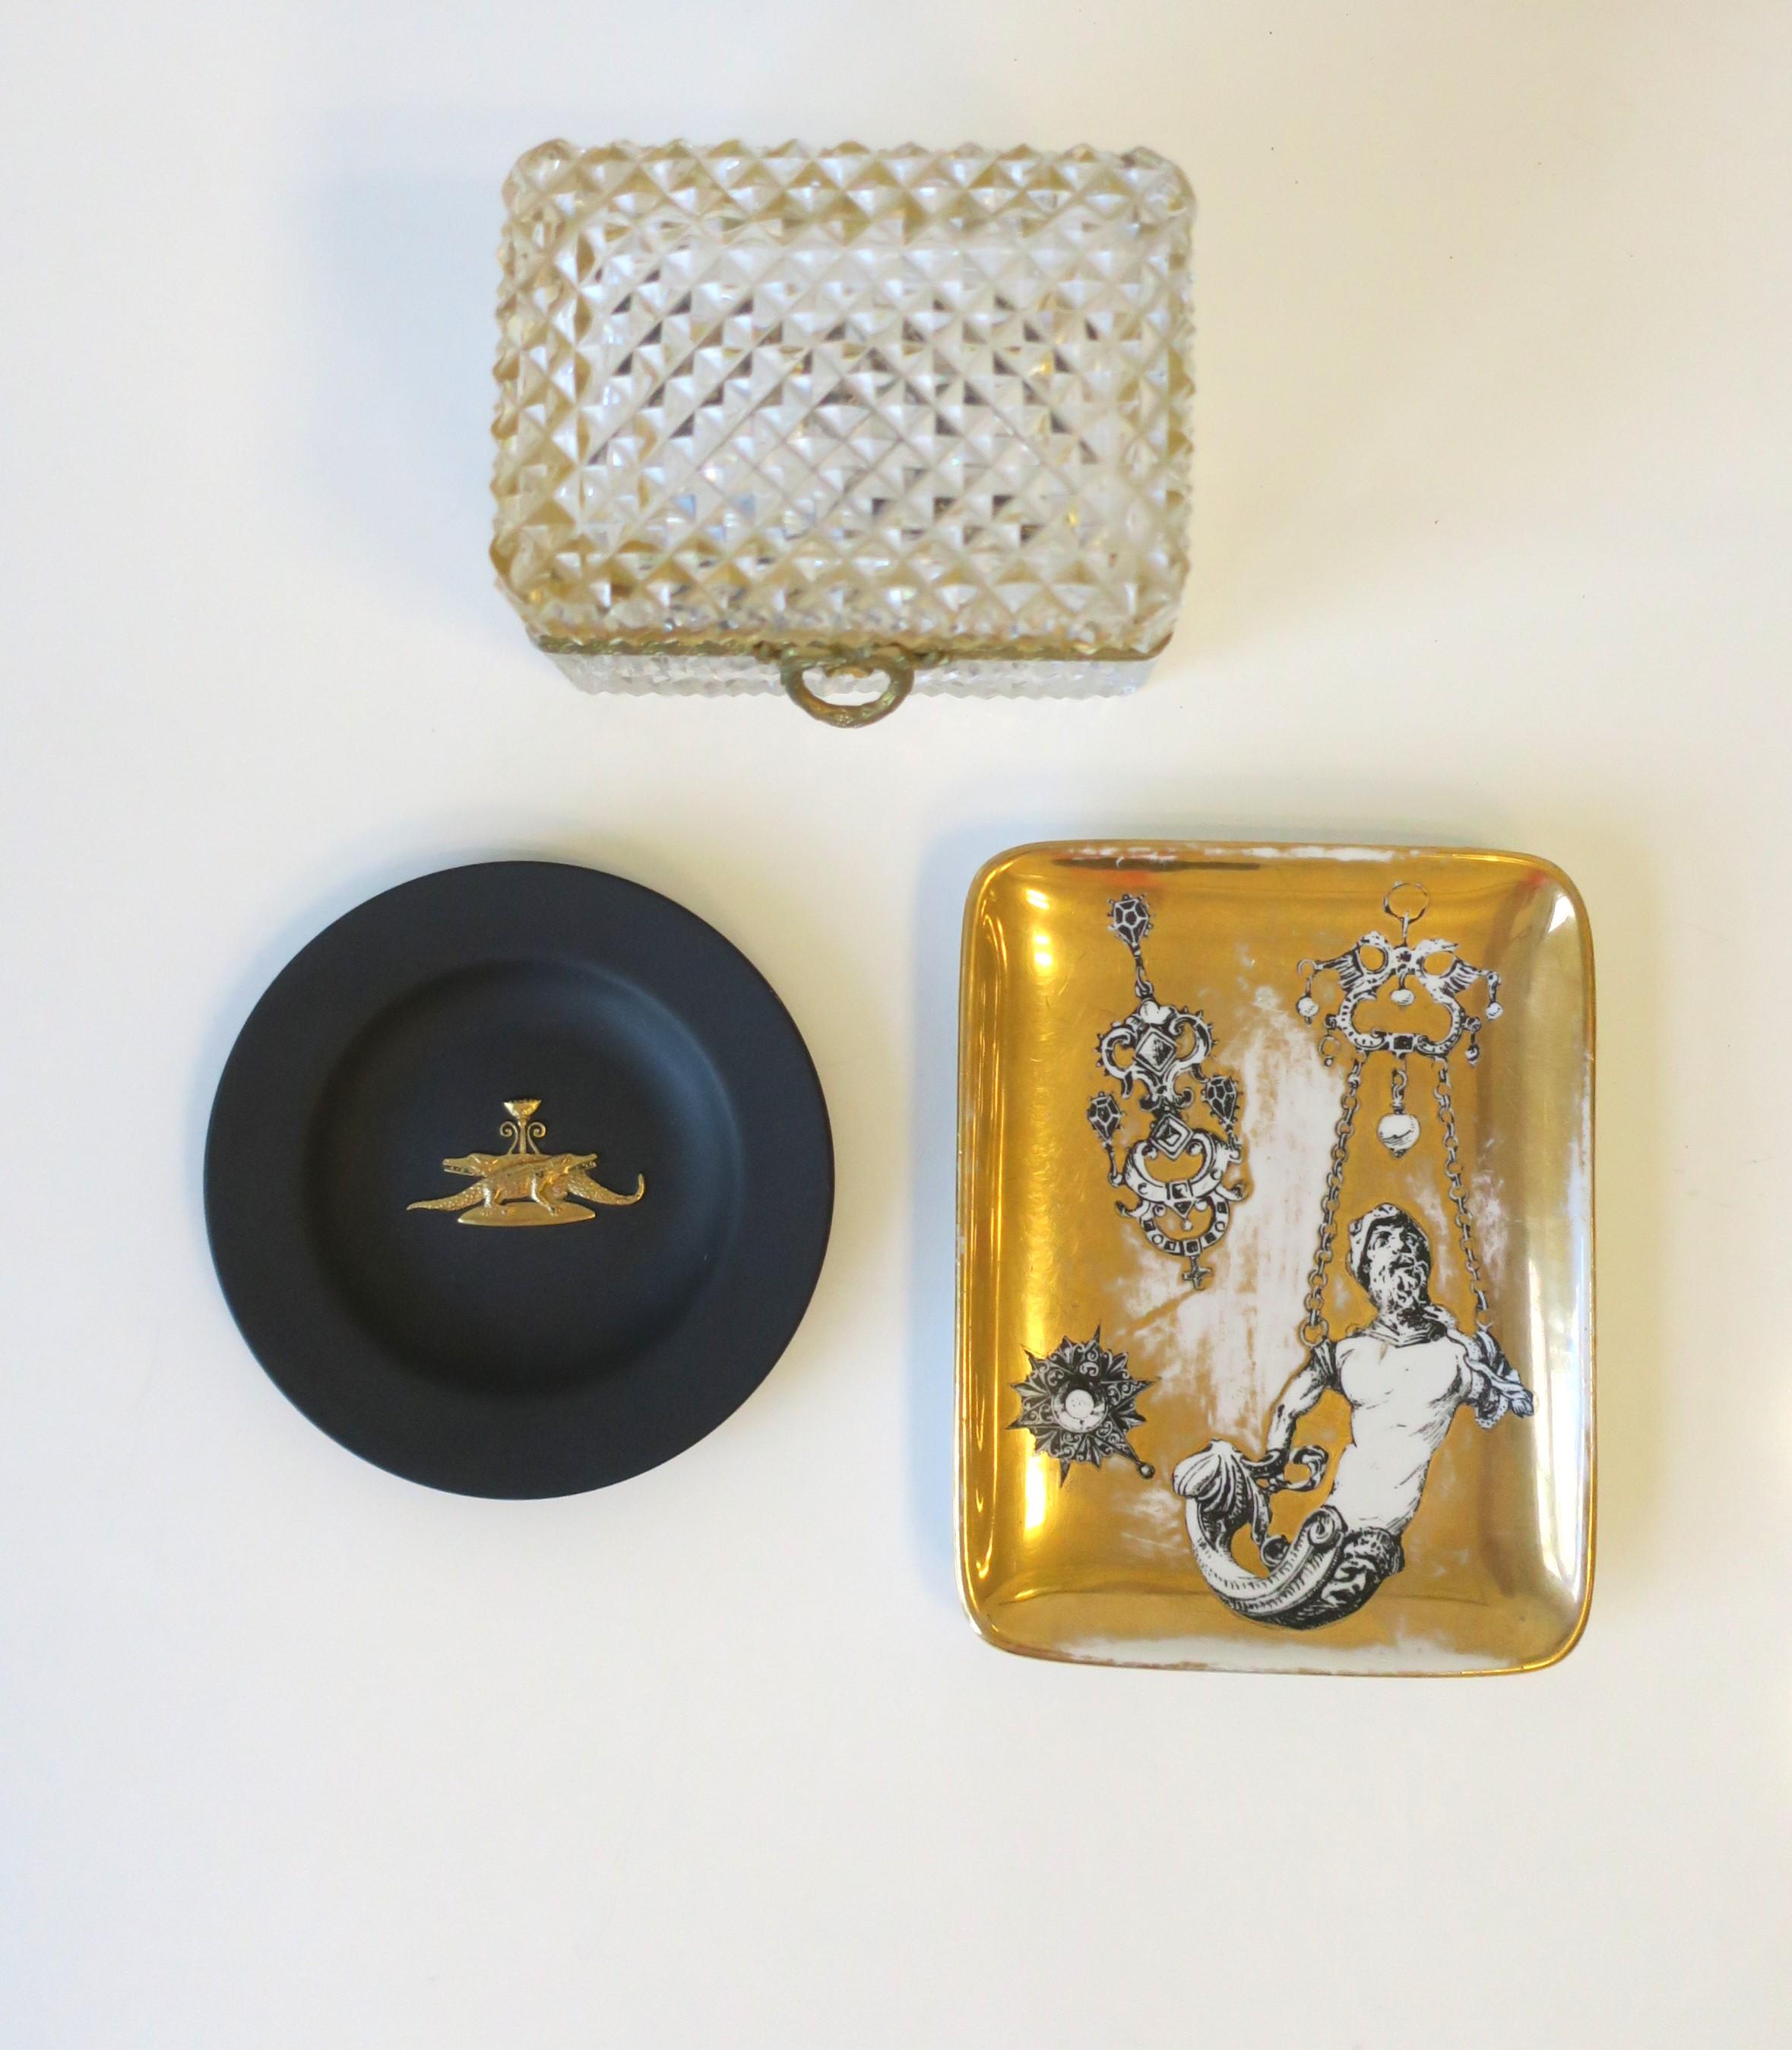 20th Century English Wedgwood Black Basalt and Gold Jewelry Dish Neoclassical Revival For Sale